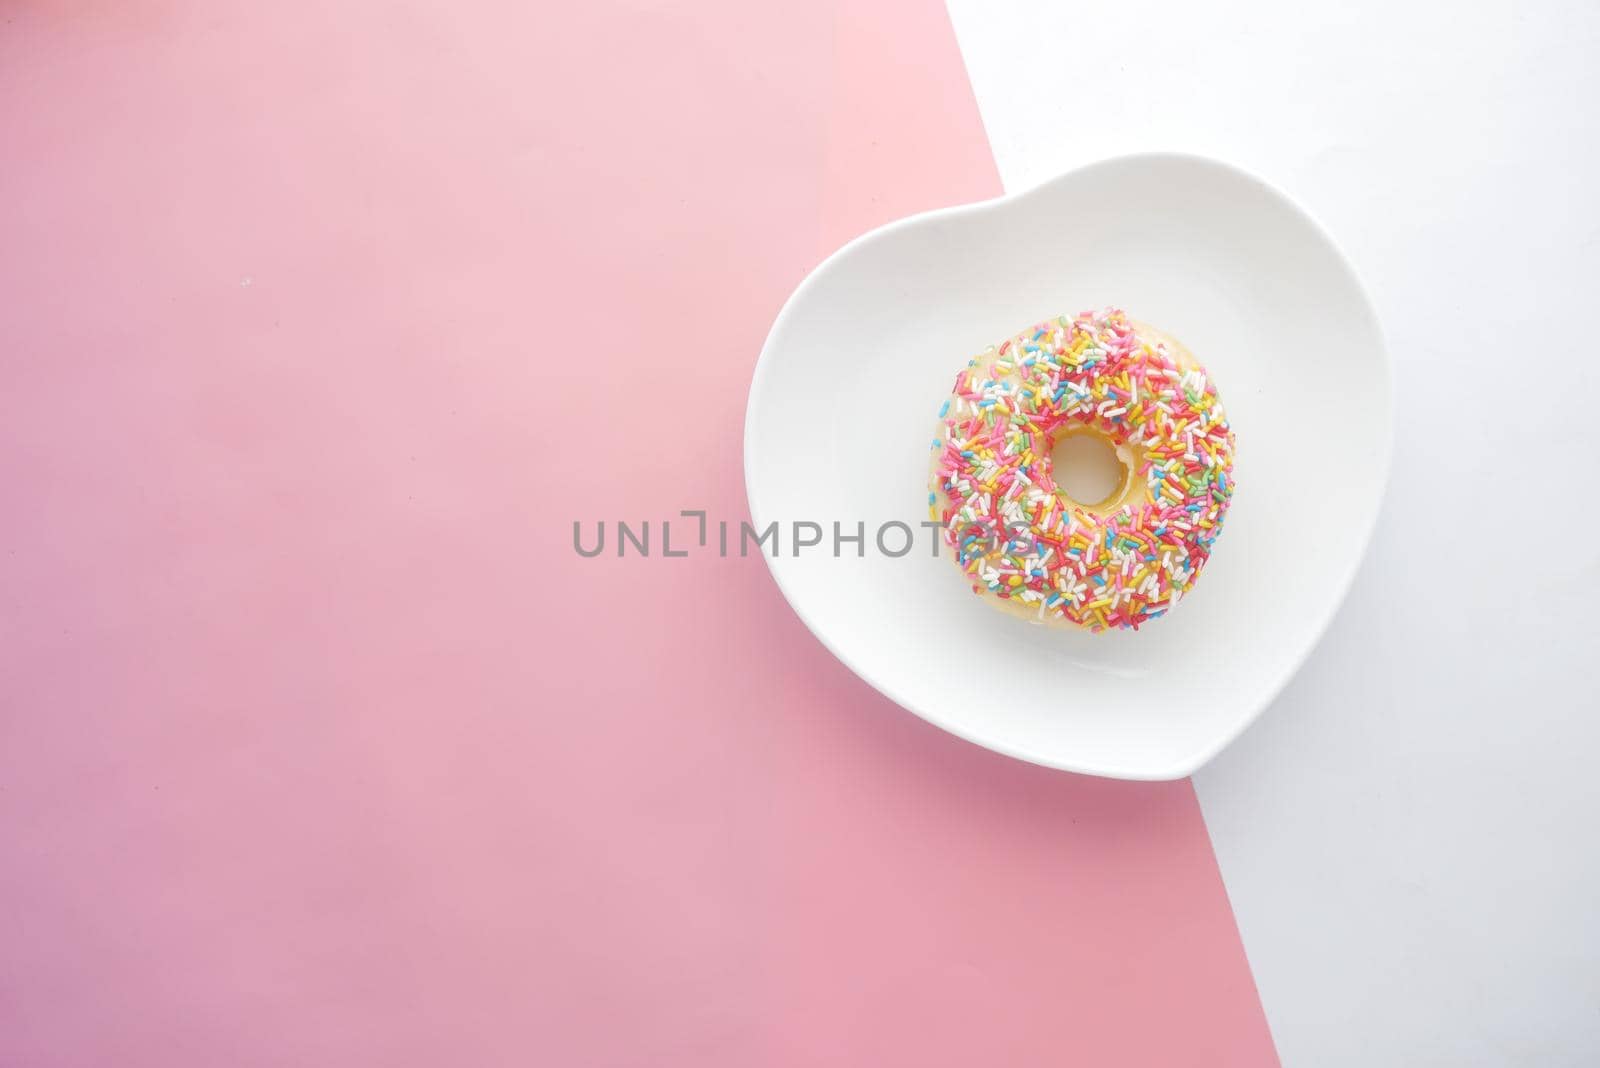 chocolate donuts on plate with copy space.